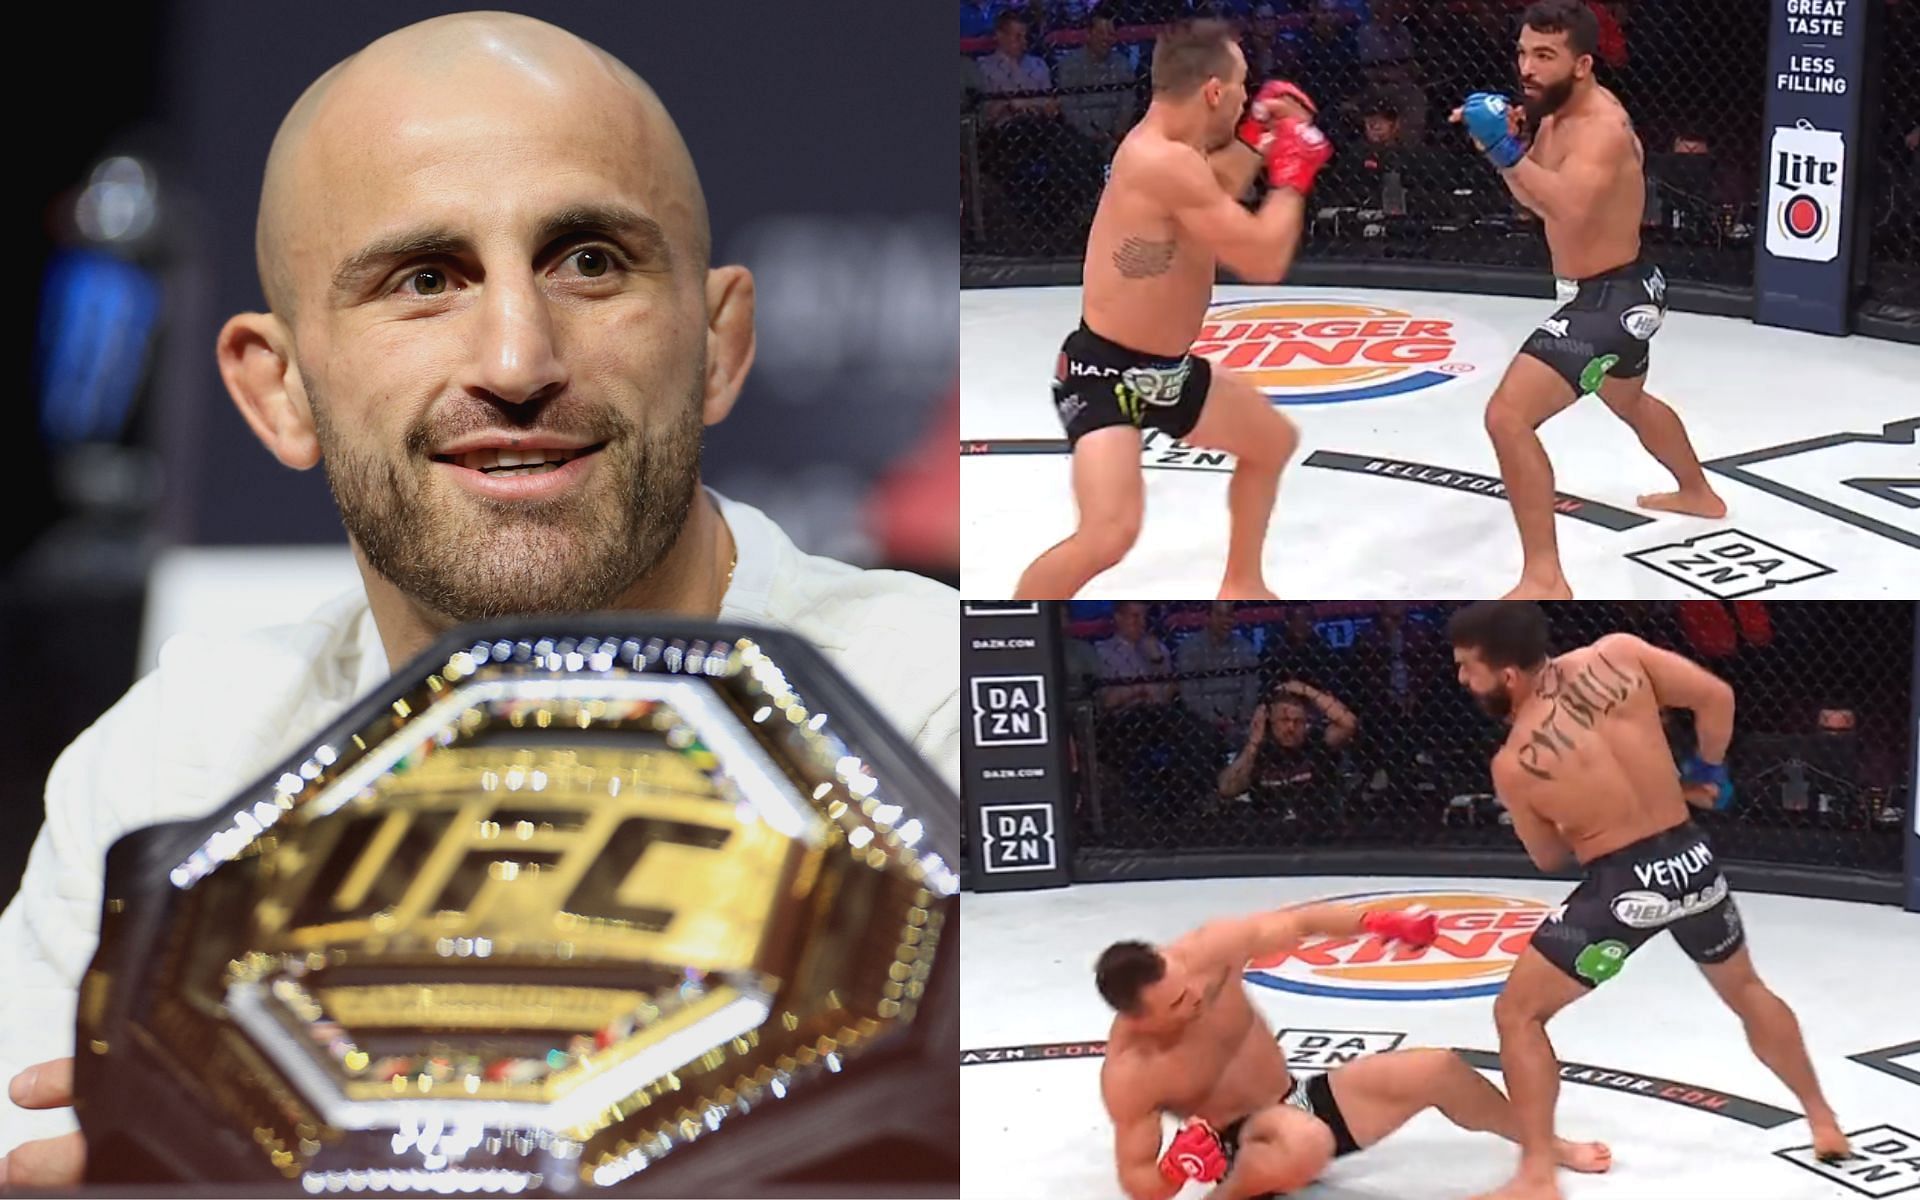 "He got rid of a guy like Michael Chandler in a minute-and-a-half" - Henry Cejudo predicts how a cross-promotion fight between Alexander Volkanovski and Patricio Pitbull will go